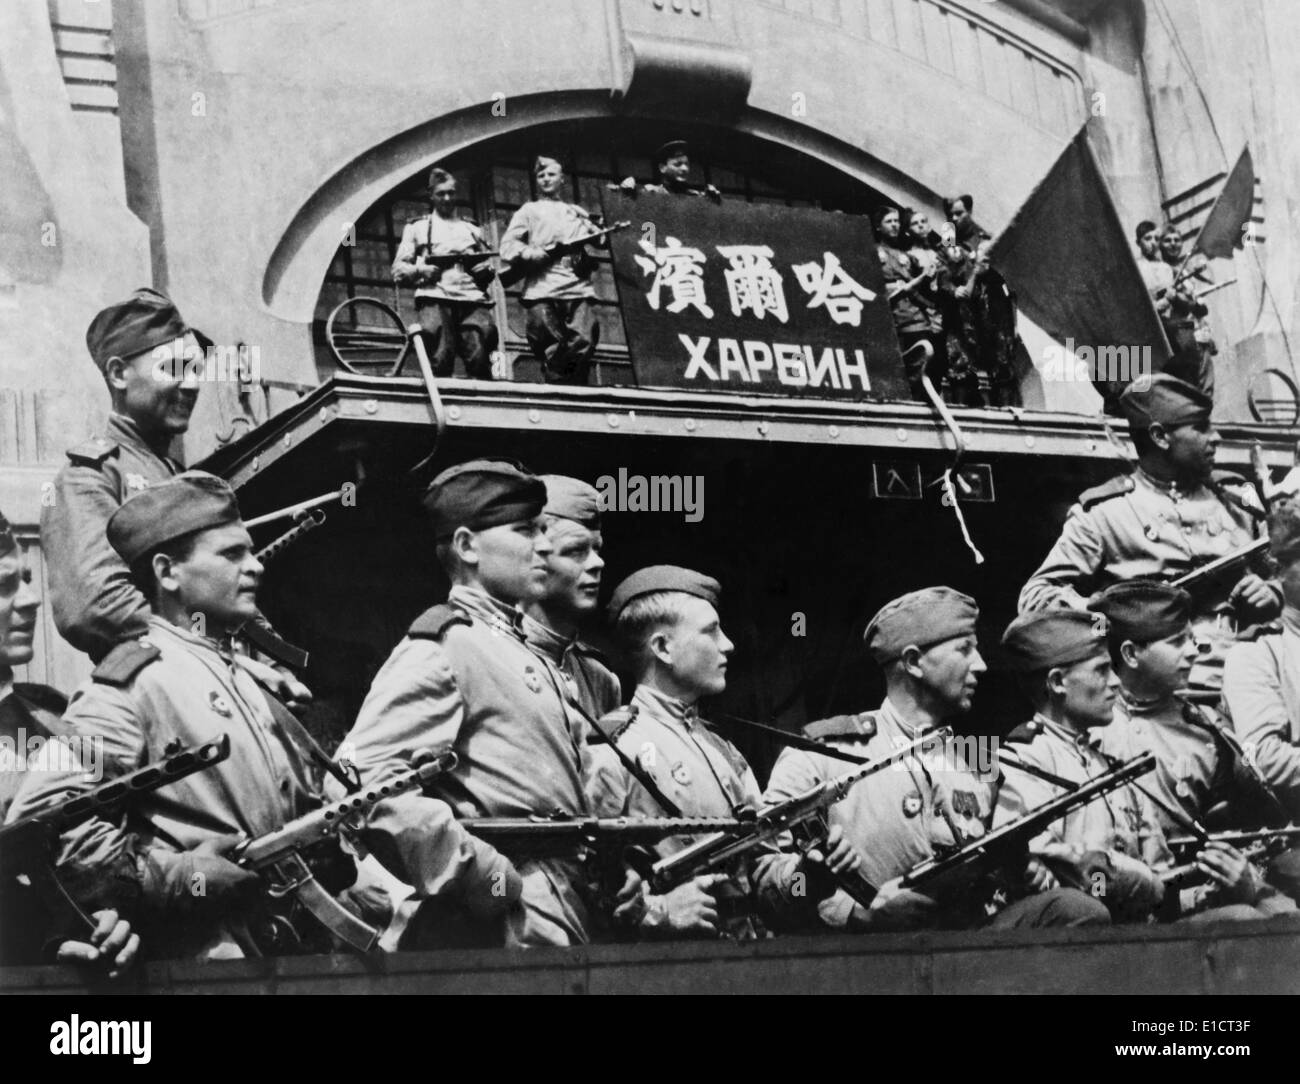 Soviet soldiers in Harbin, China, during the last days of World War 2. The Soviet Union declared war on Japan on Aug. 8, 1945, Stock Photo